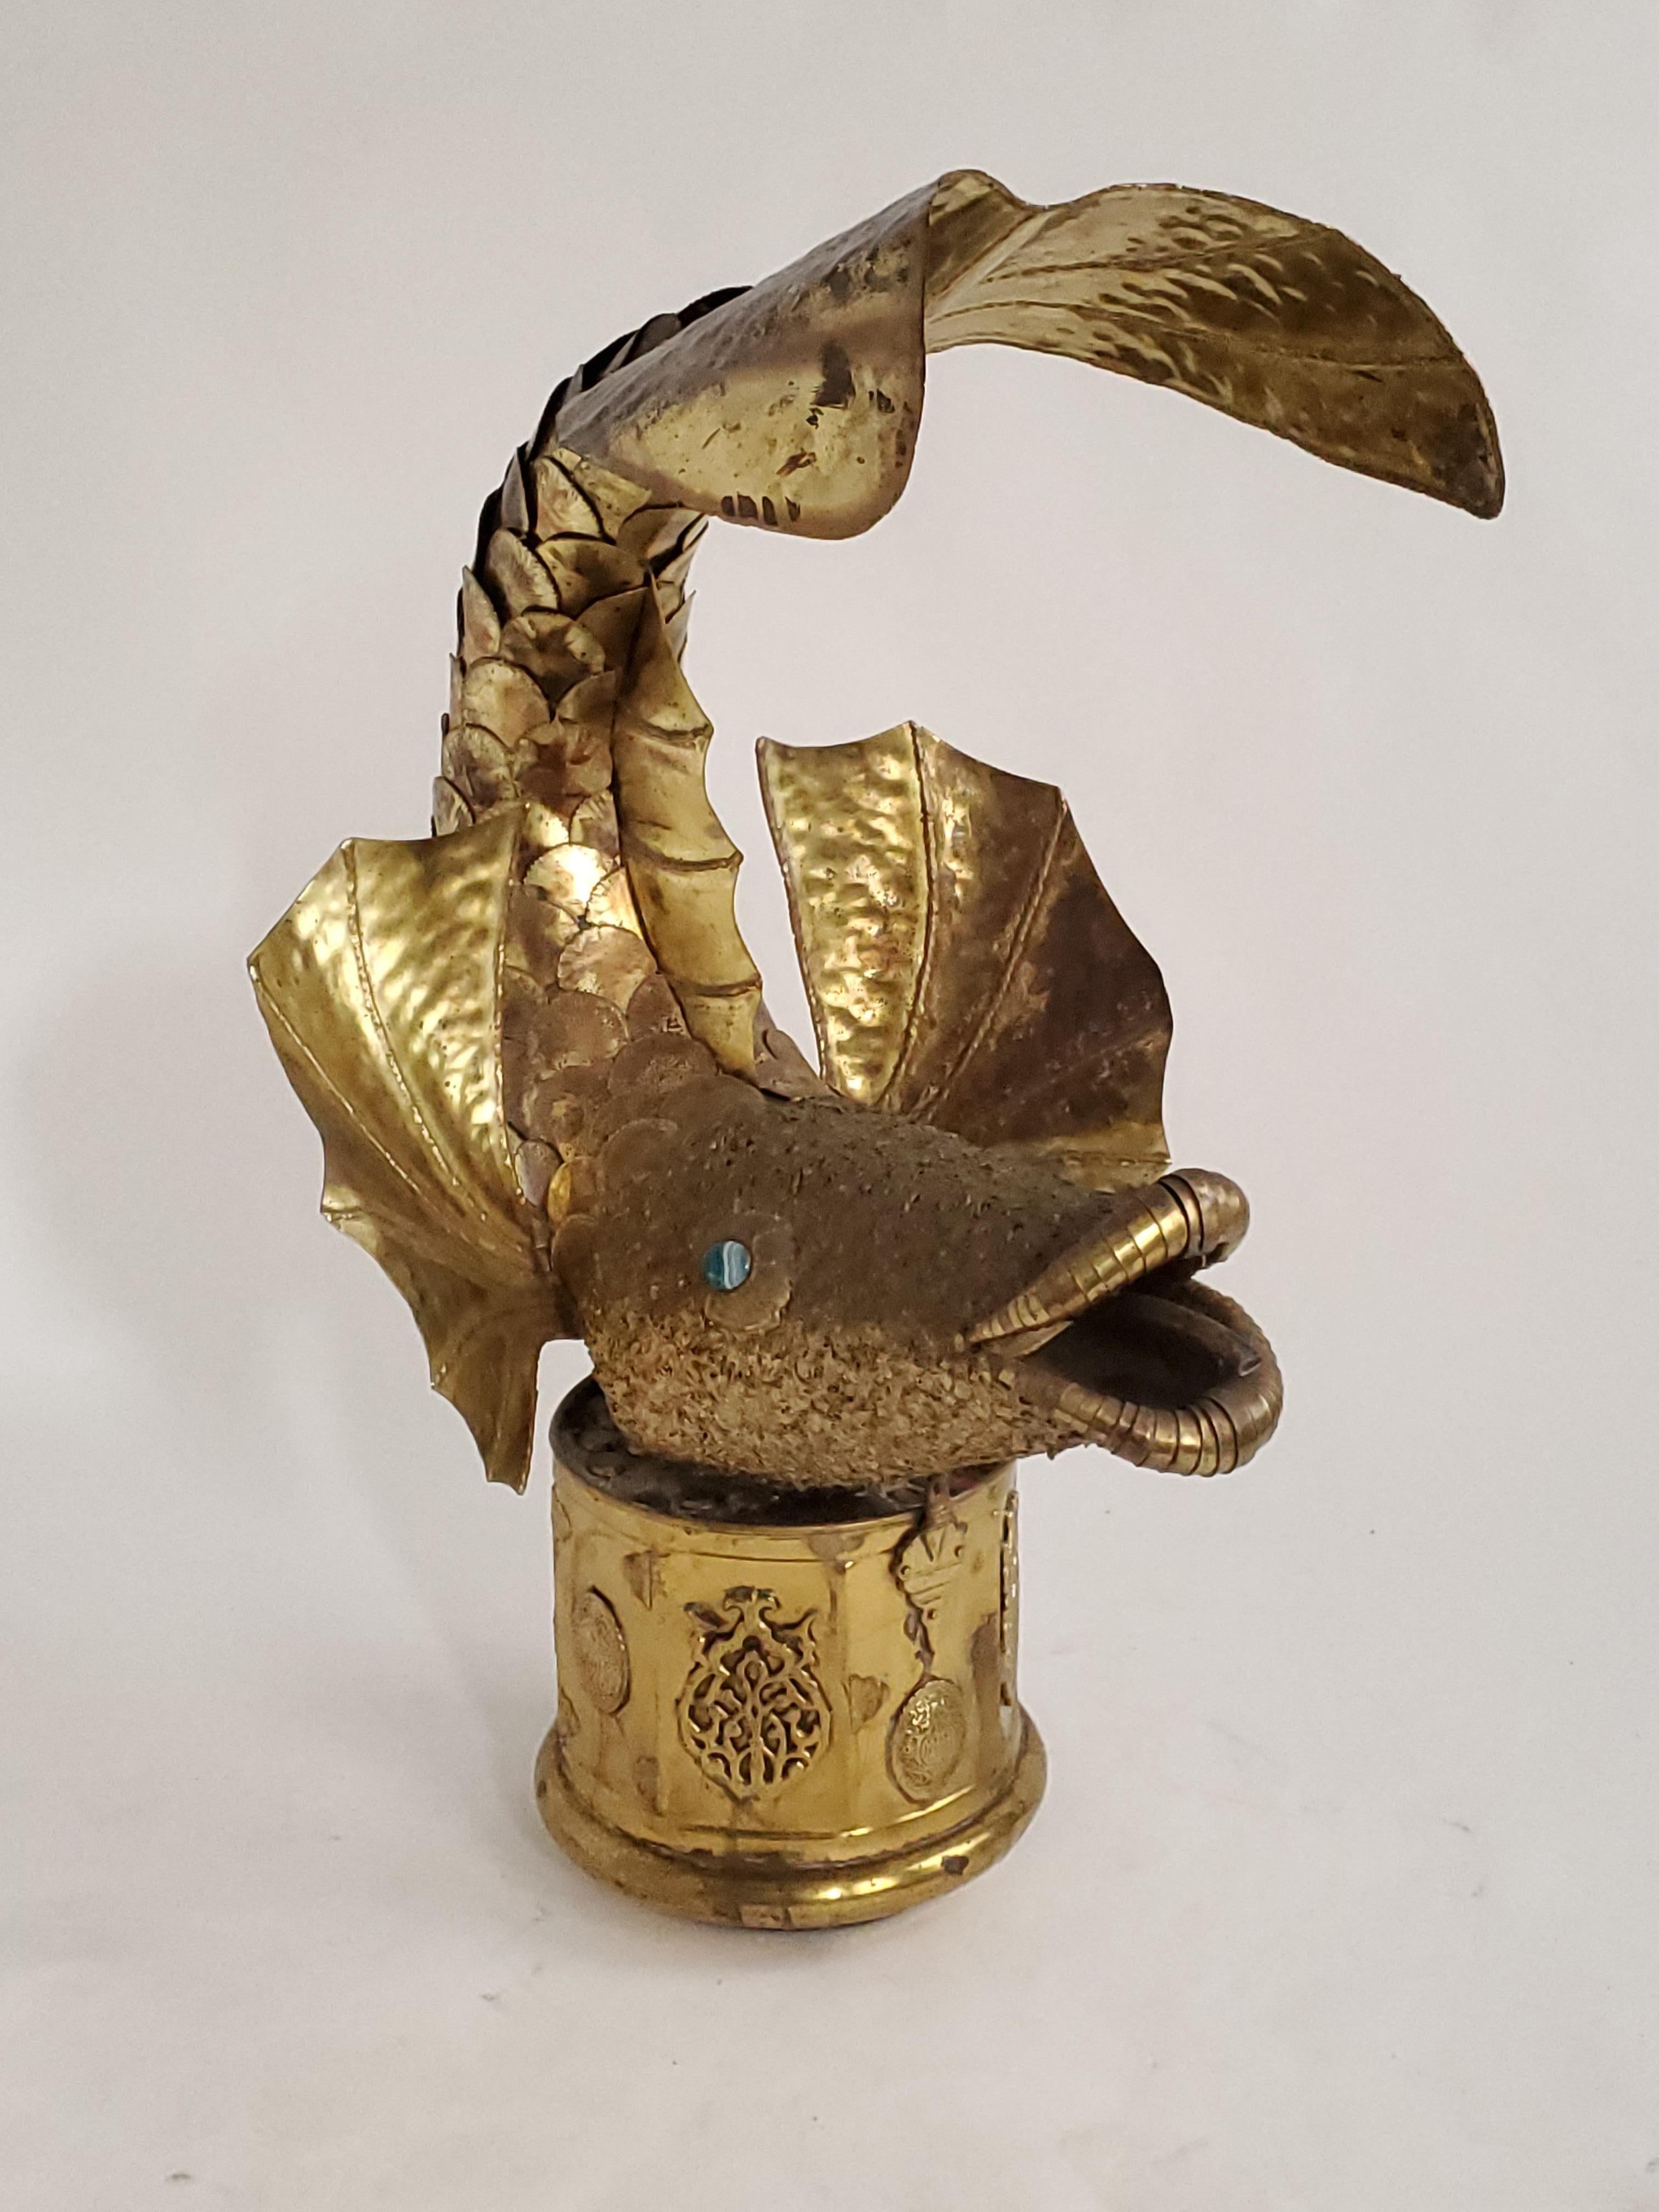 Fish sculpture, made of torch cutted, hand hammered and welded brass structure sitting on a oriental style brass base filled with ciment.

All his fountains sculpture are unique but this one really stand out with is tail  curling over its head ,